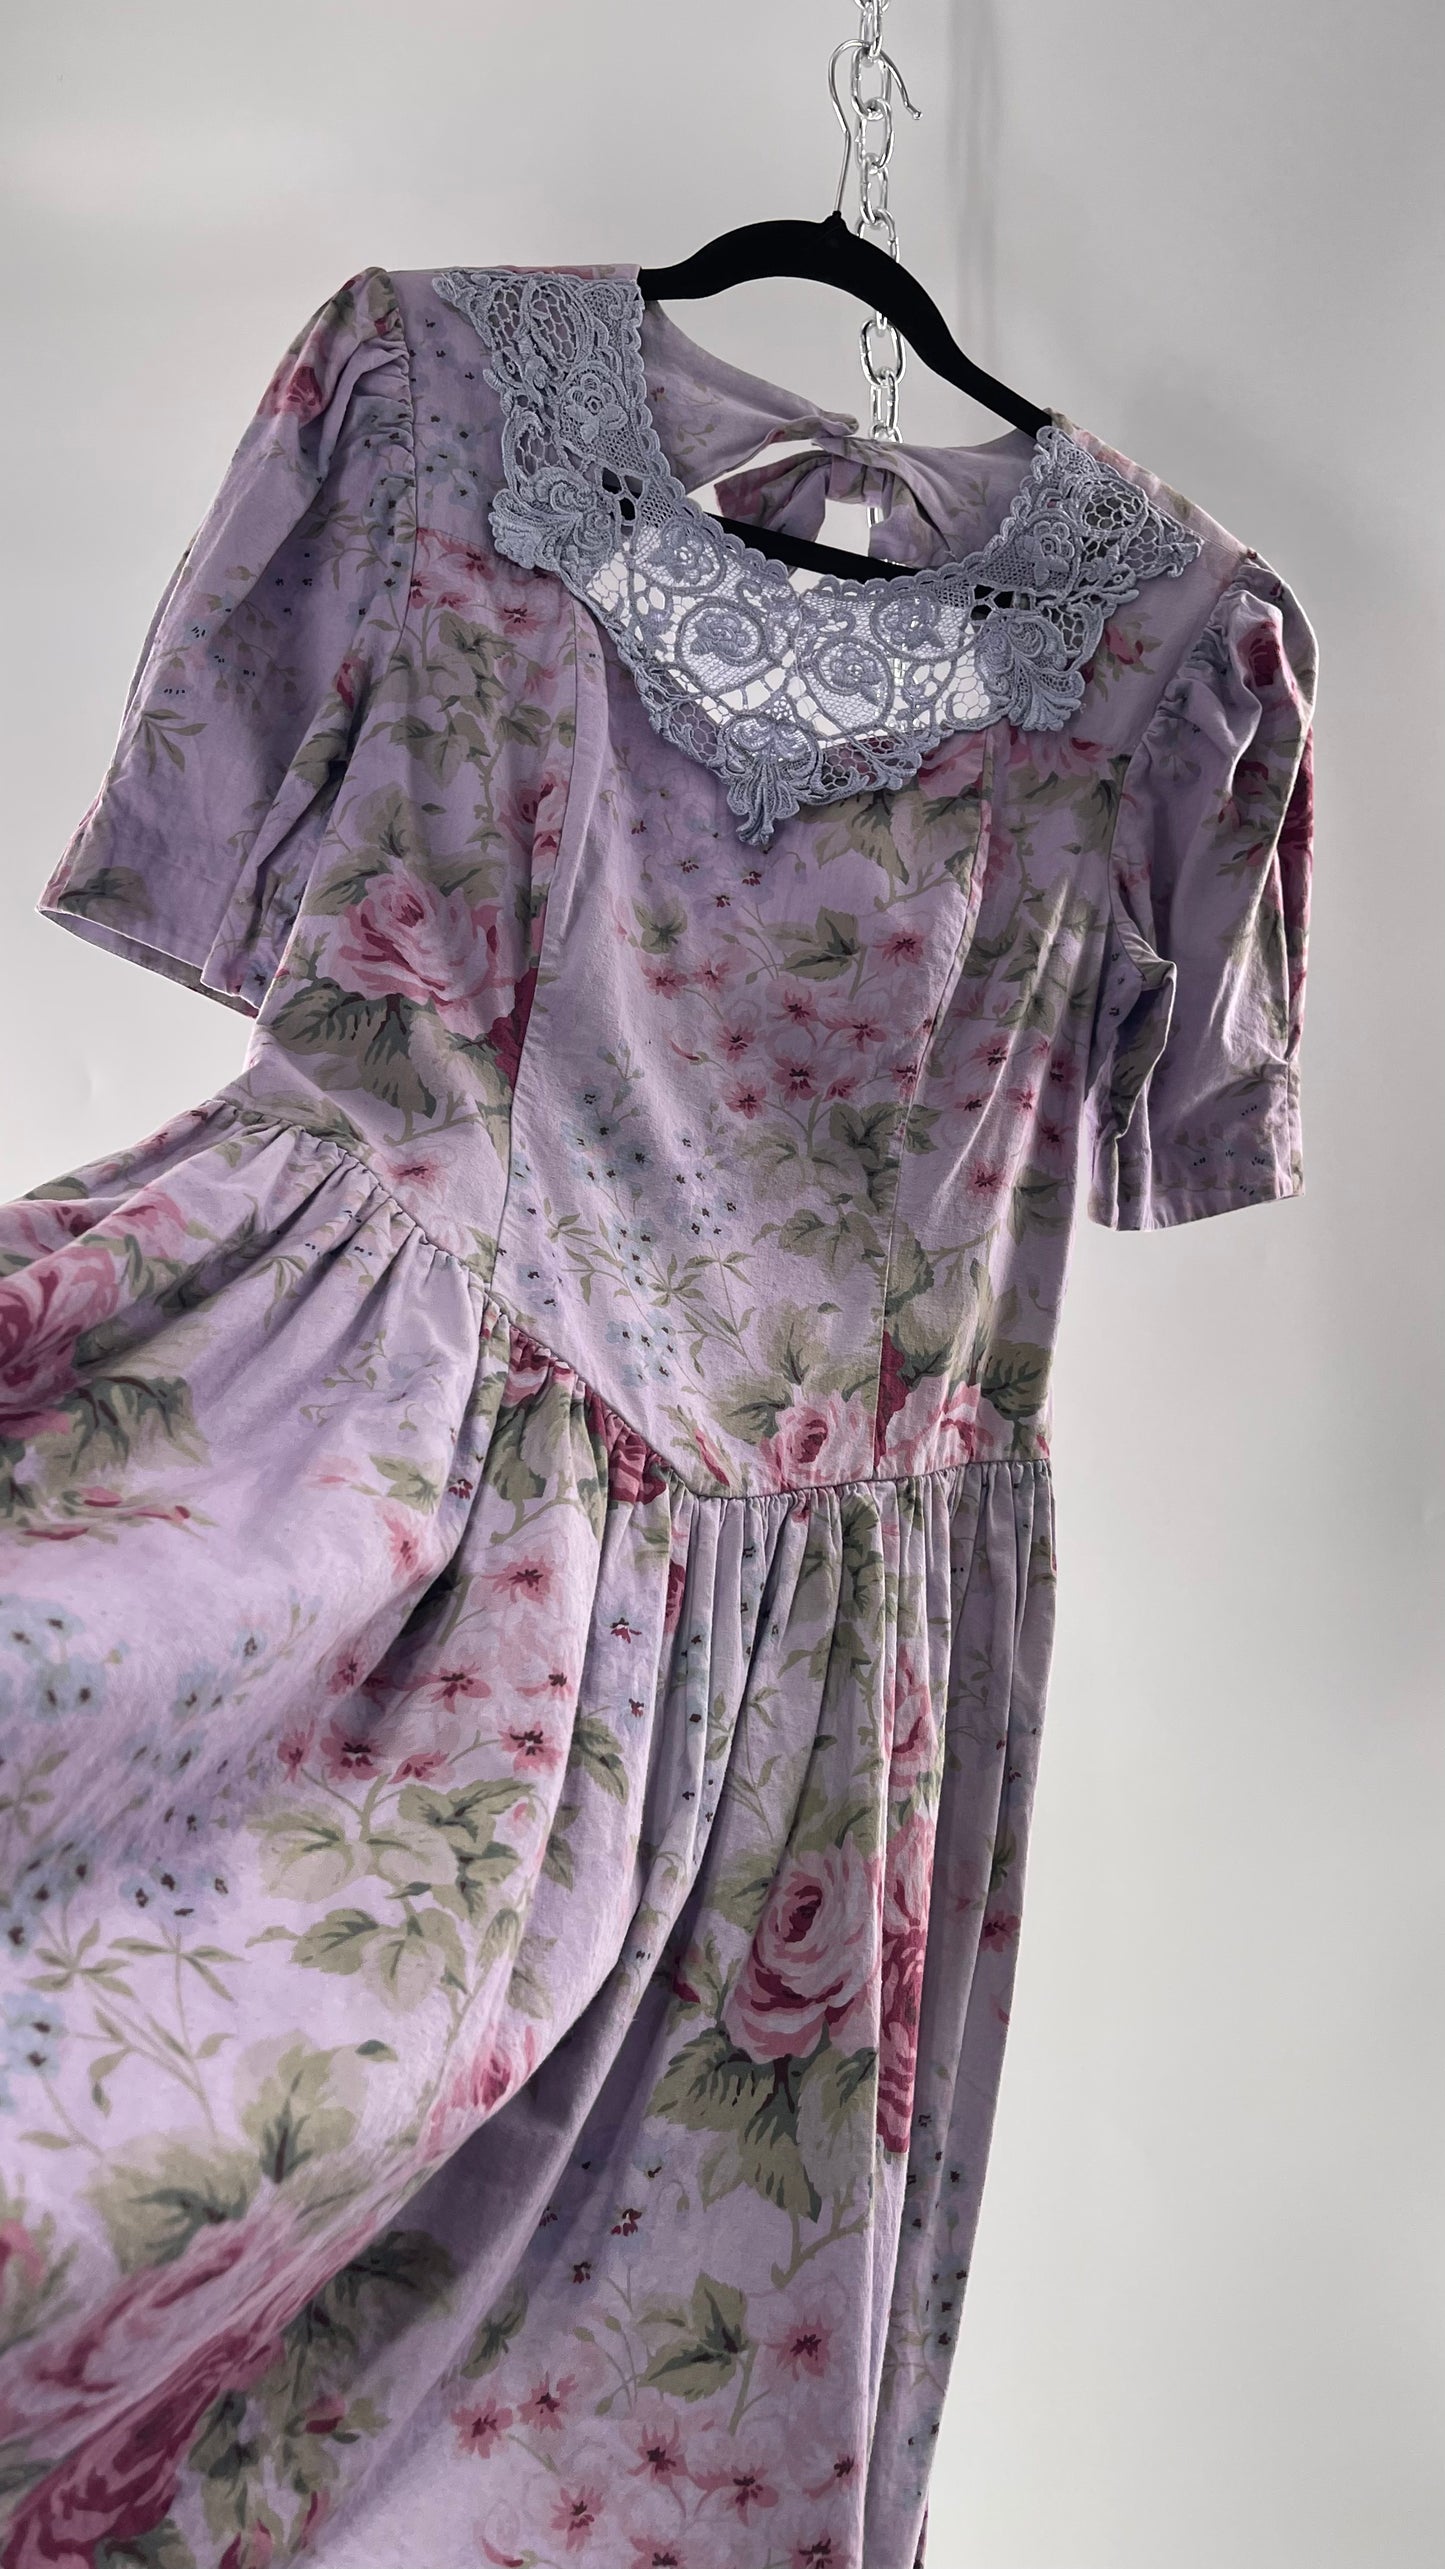 Vintage Urban Renewal Reworked and Upcycled Misty Lane Lilac/Lavender Floral Fit/Flare Dress with Sweetheart Neckline, Lace Detail and Bow Adorned Open Back  (11/12)